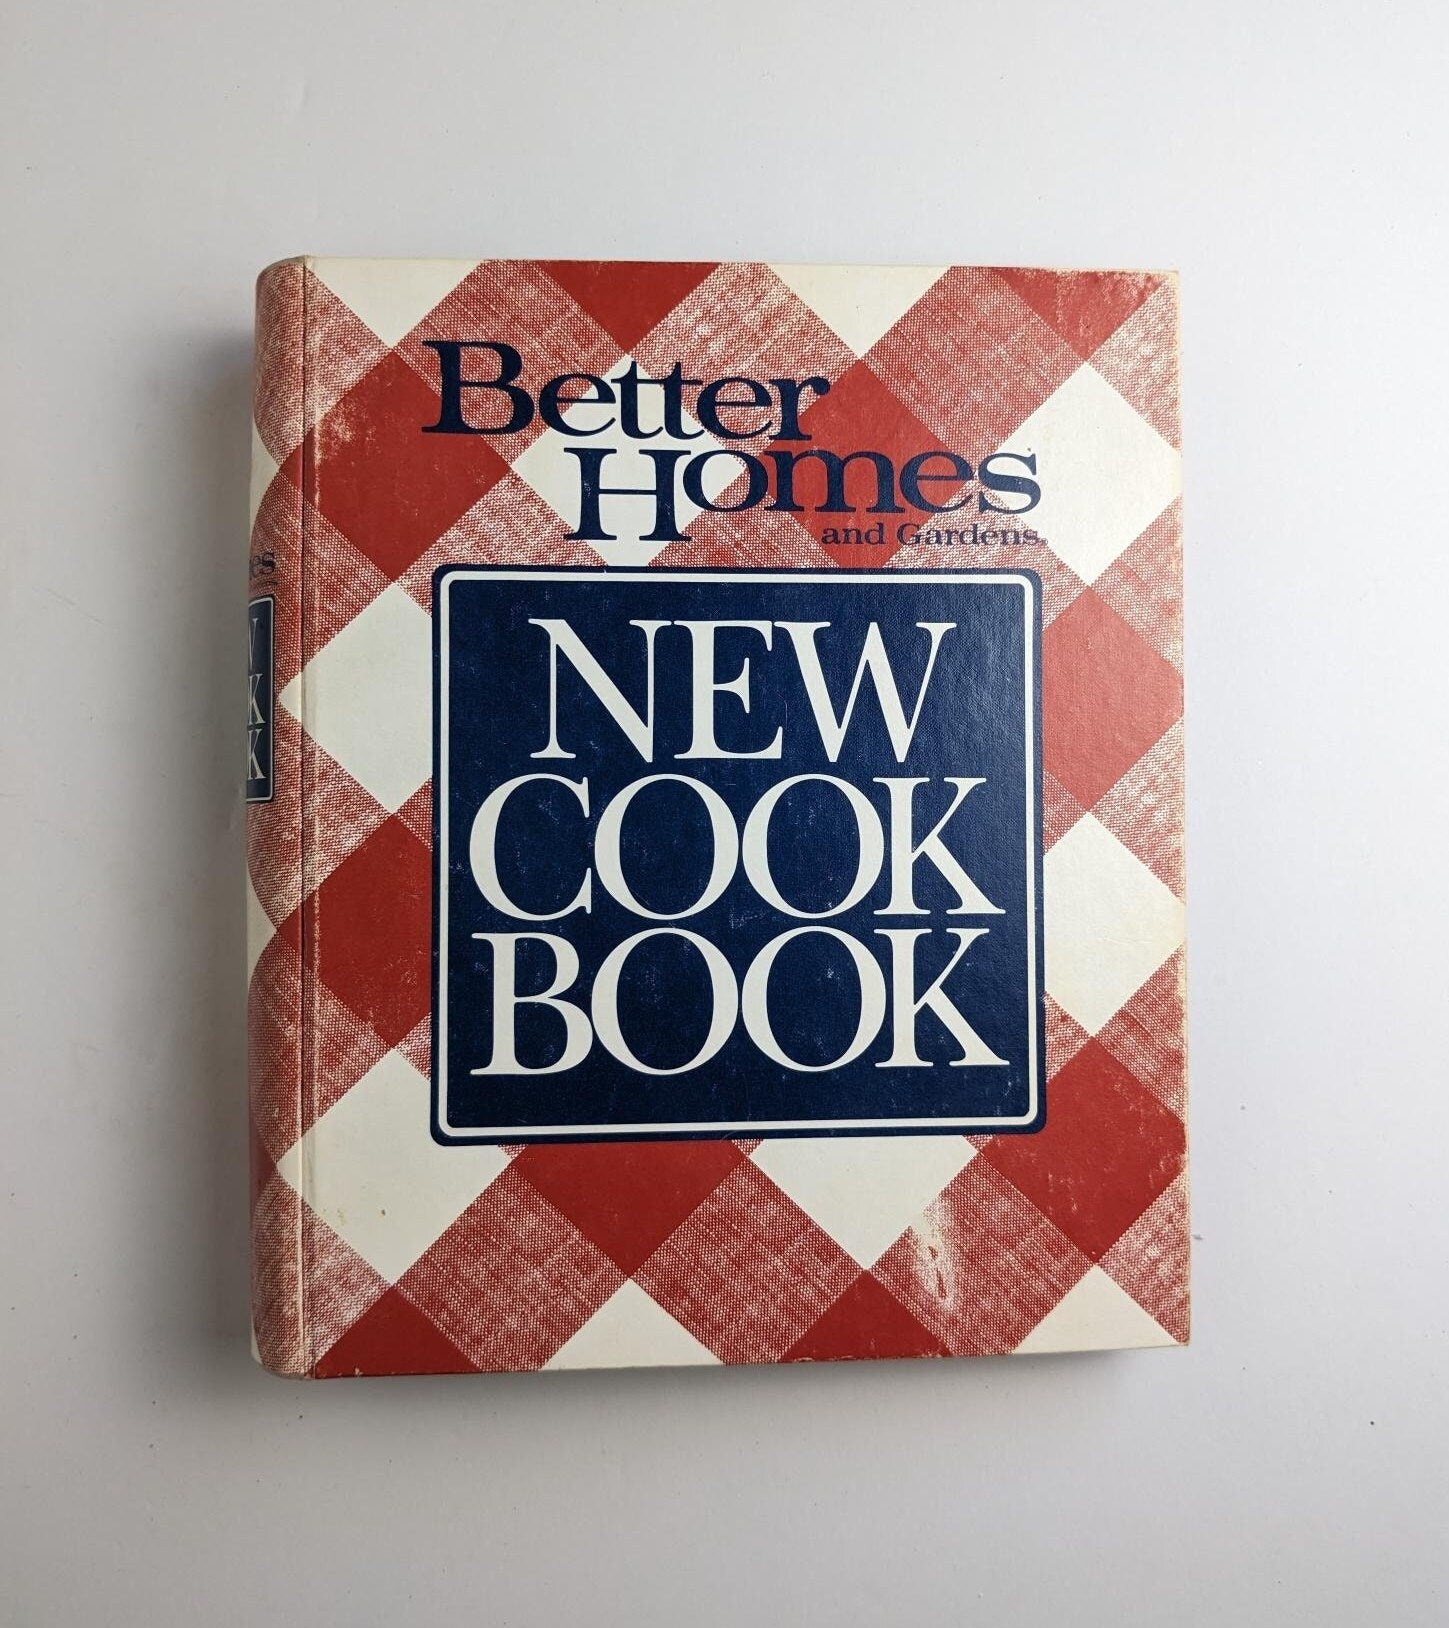 Better Home and Gardens 'New Cook Book'